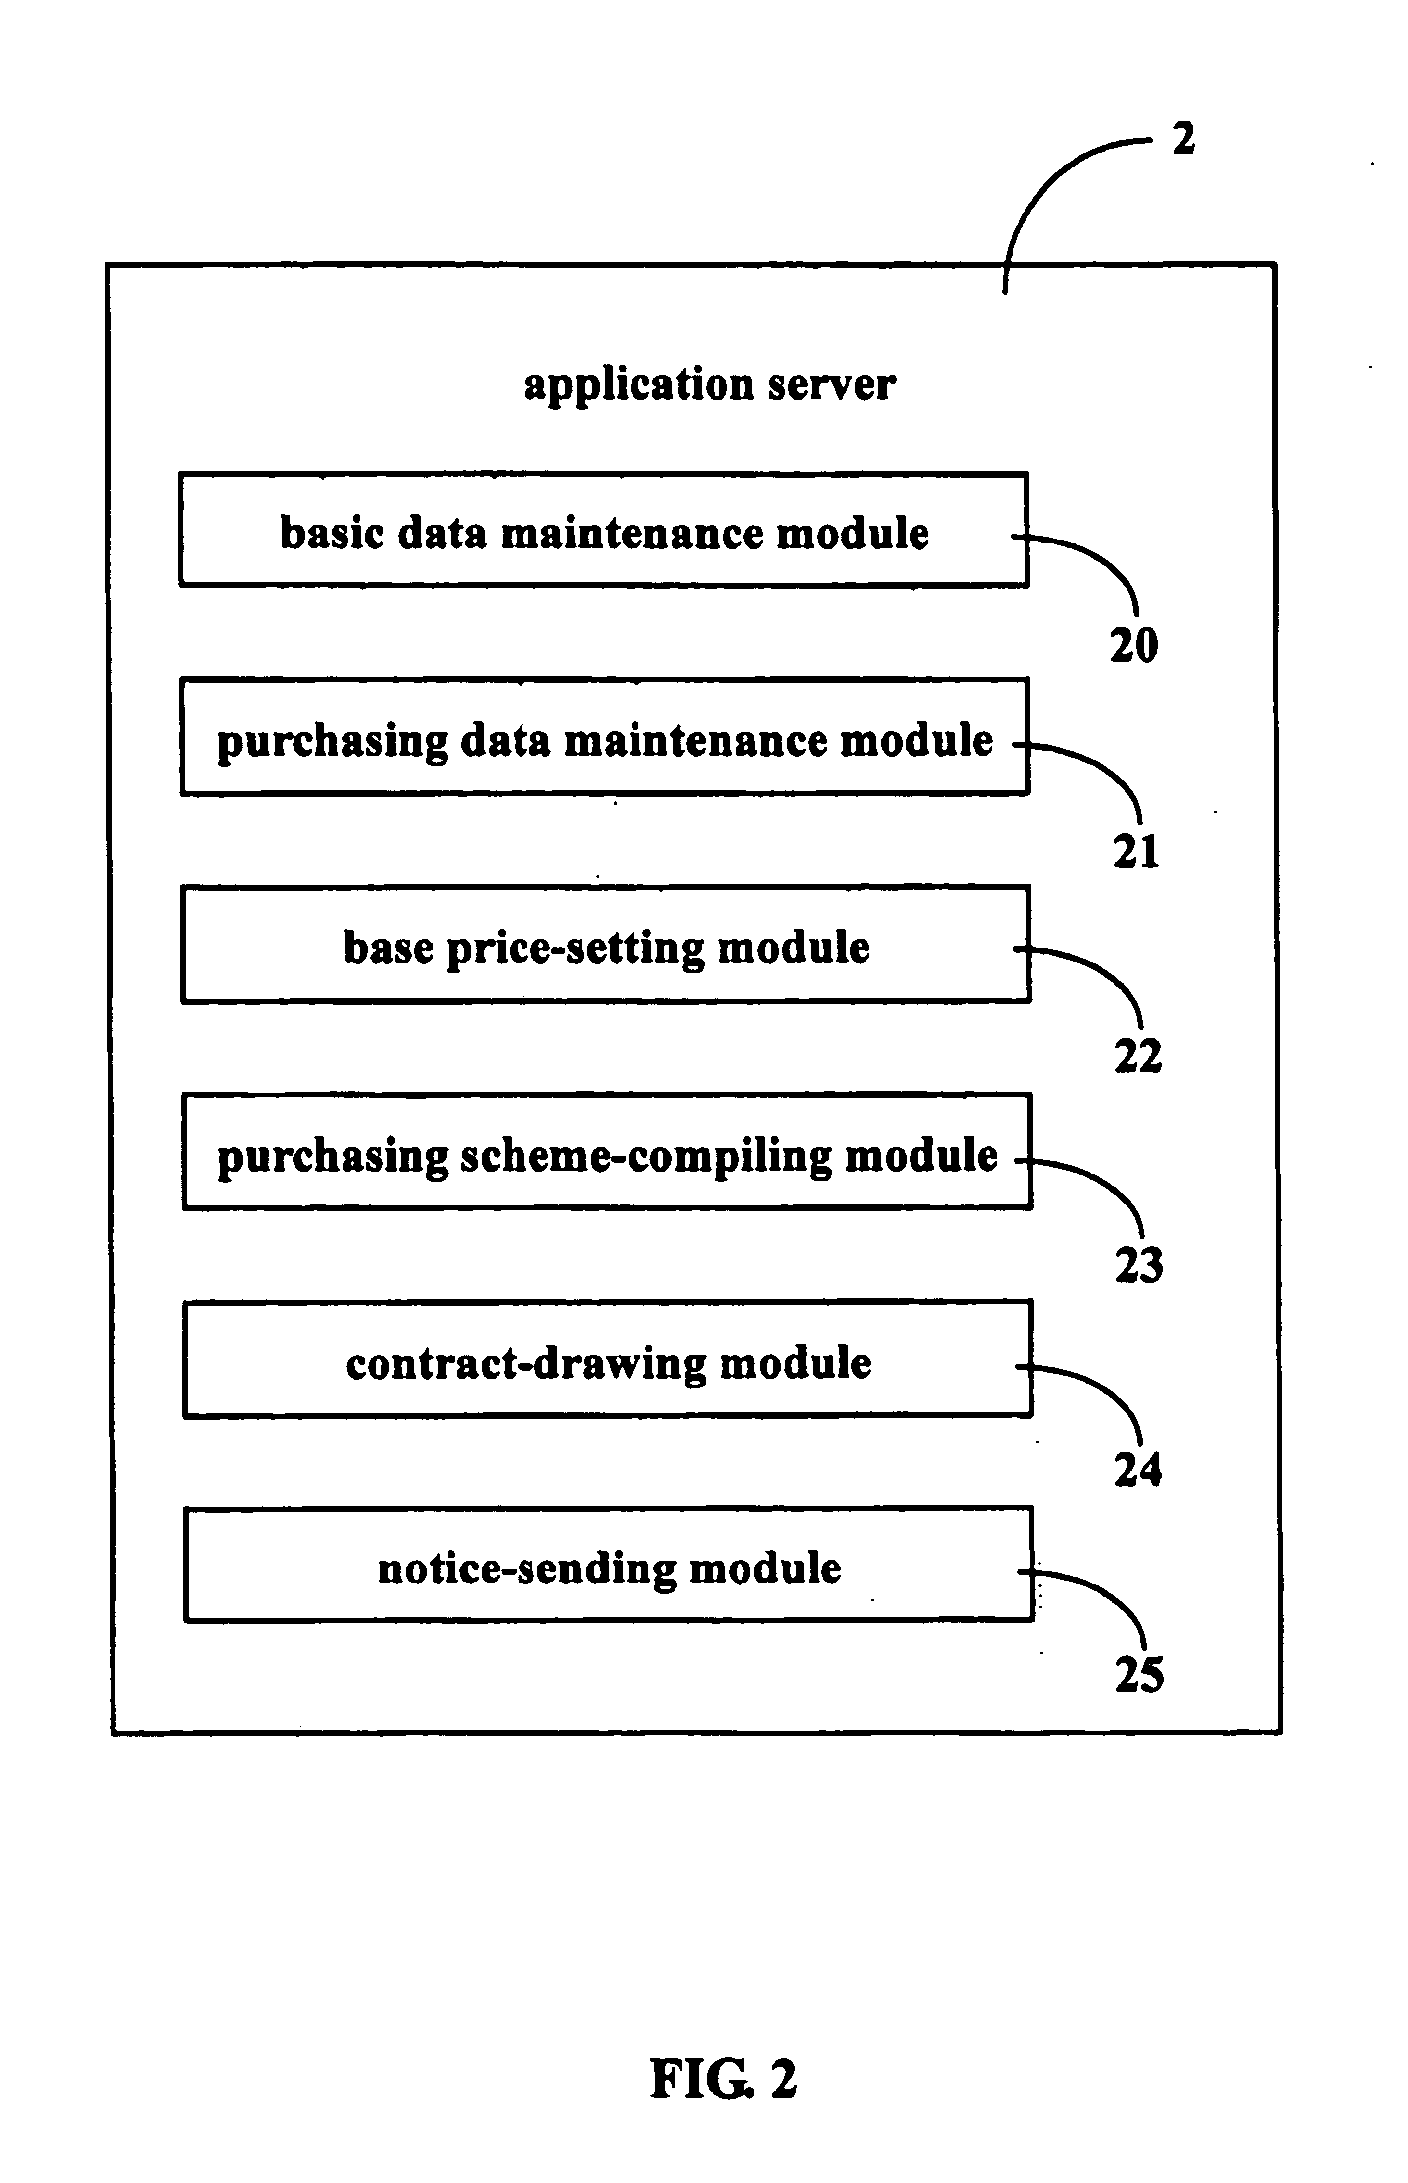 Machine purchasing system and method